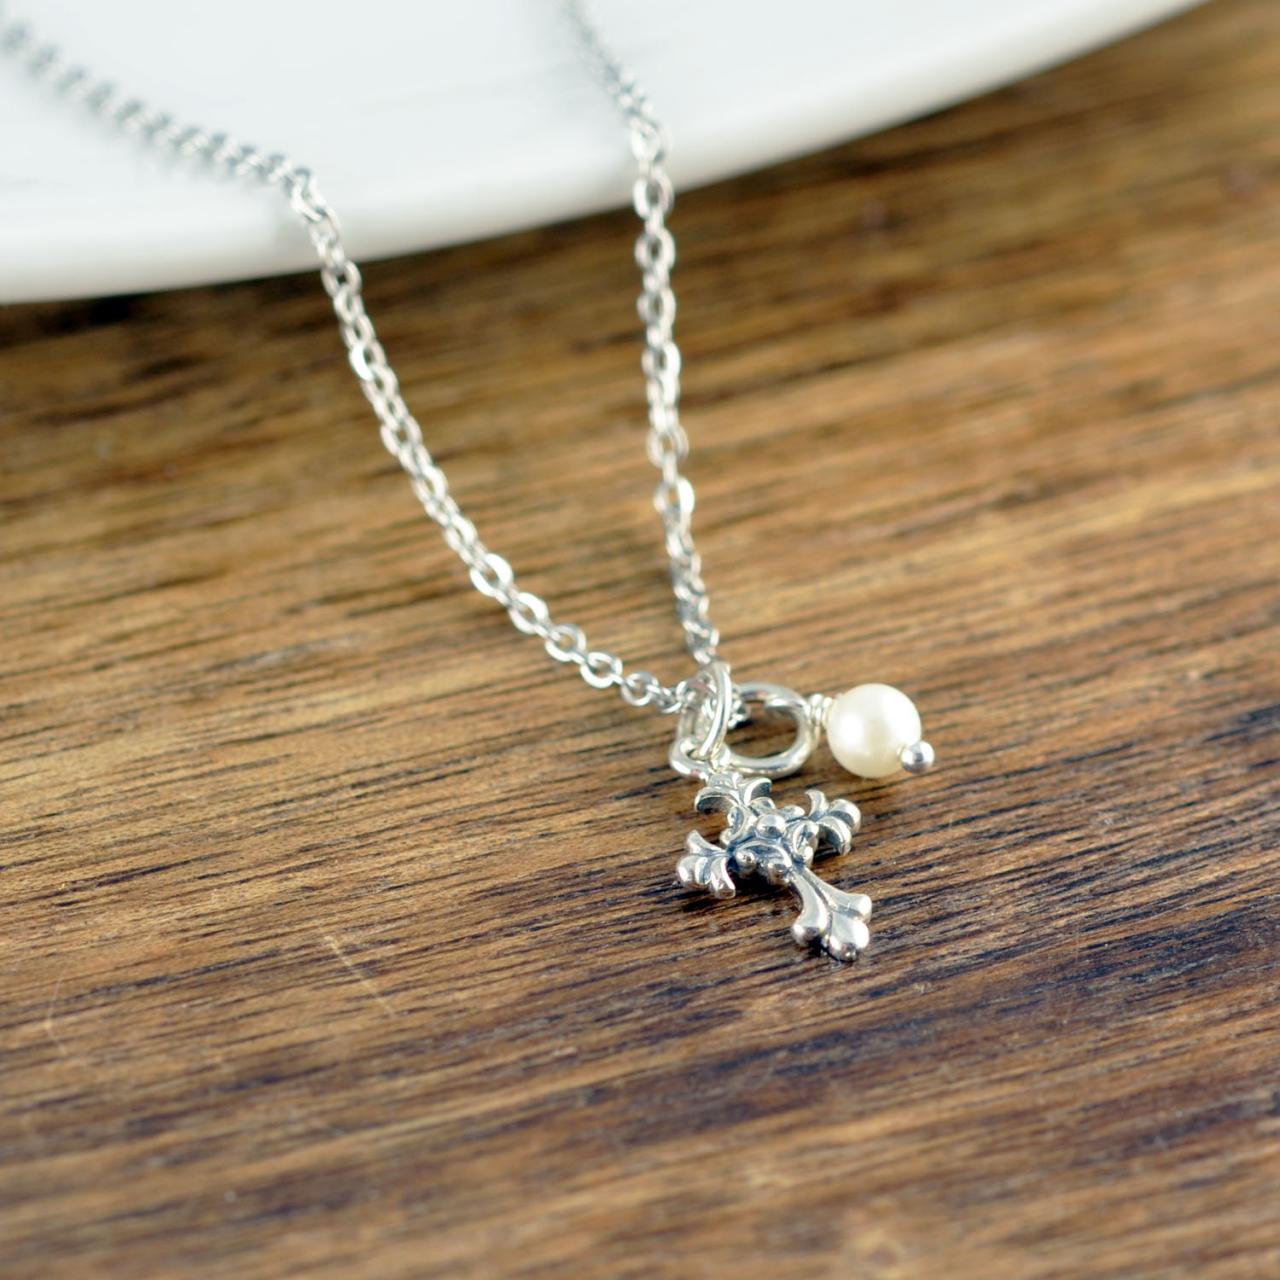 Tiny Cross Necklace, Silver Cross Necklace, Cross Necklace, Petite Necklace, Christian Gifts,communion Necklace,confirmation Gifts For Girls